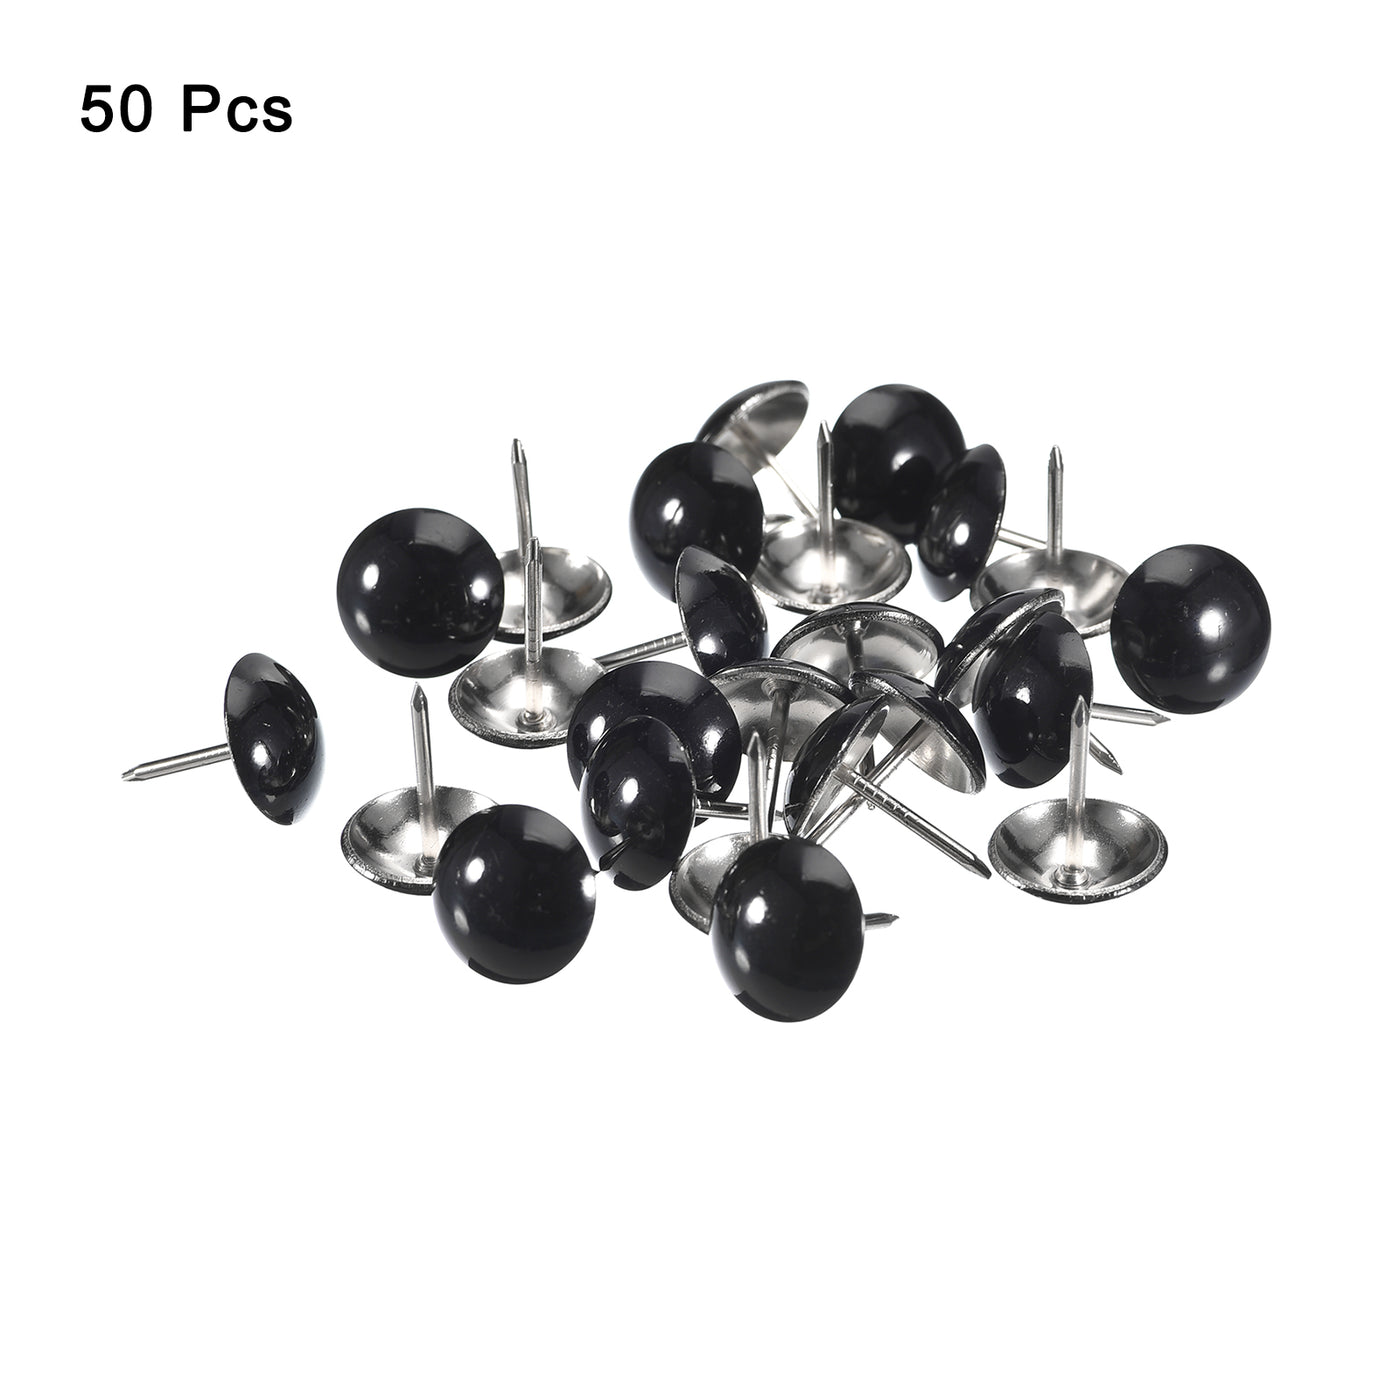 uxcell Uxcell 50Pcs 16mmx20mm Round Decorative Upholstery Tacks Furniture Nails, Bright Black